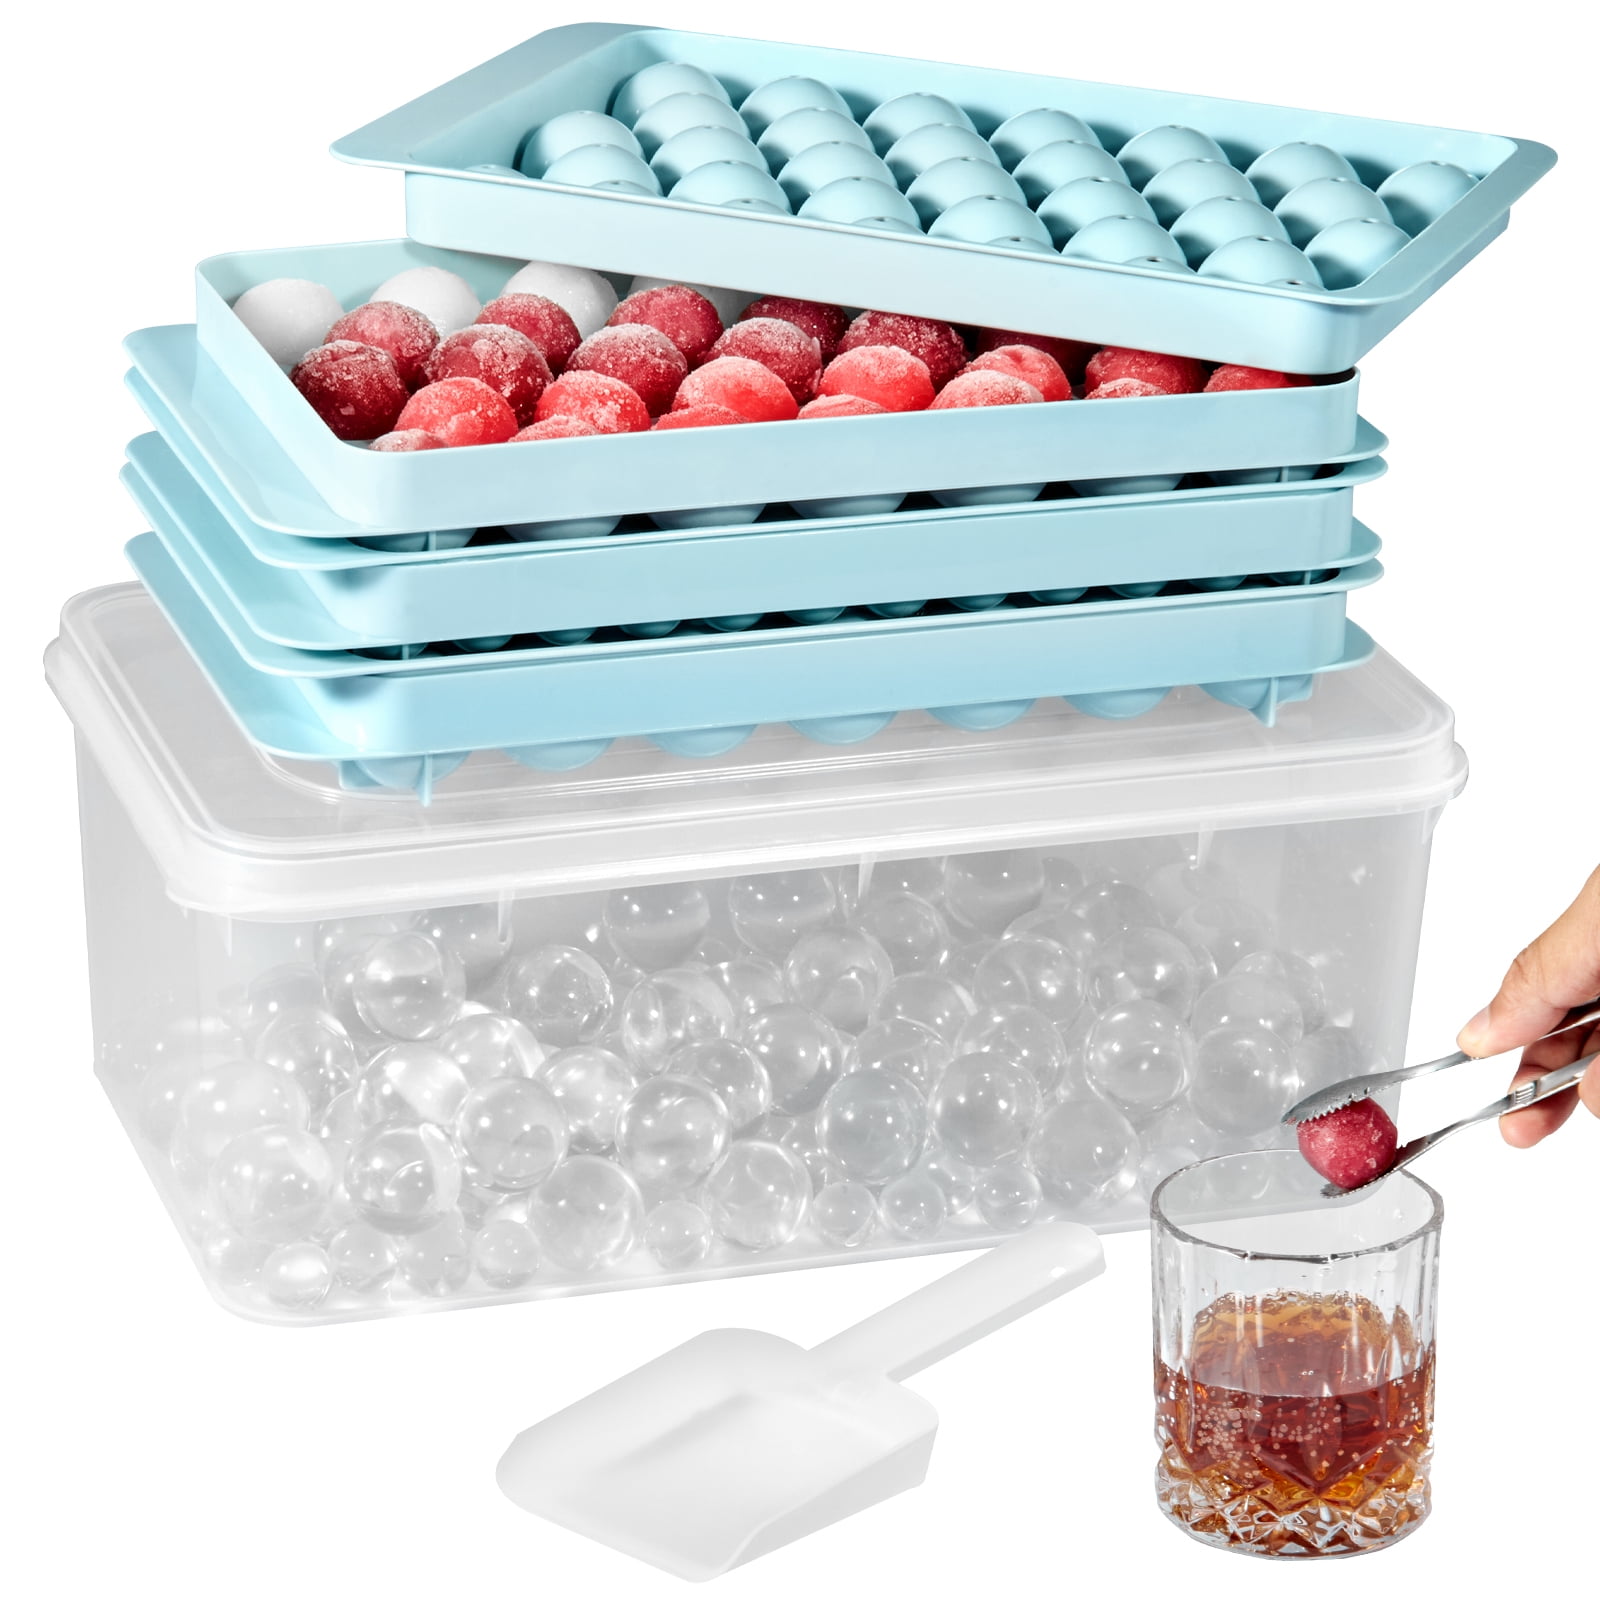 Bangp 1-Cup Silicone Freezing Tray,2 Pack,Large Ice Cube Trays with  Lid,Freezer Containers For Soup,Broth,Sauce,Ice Cube - Makes 8 Perfect 1  Cup